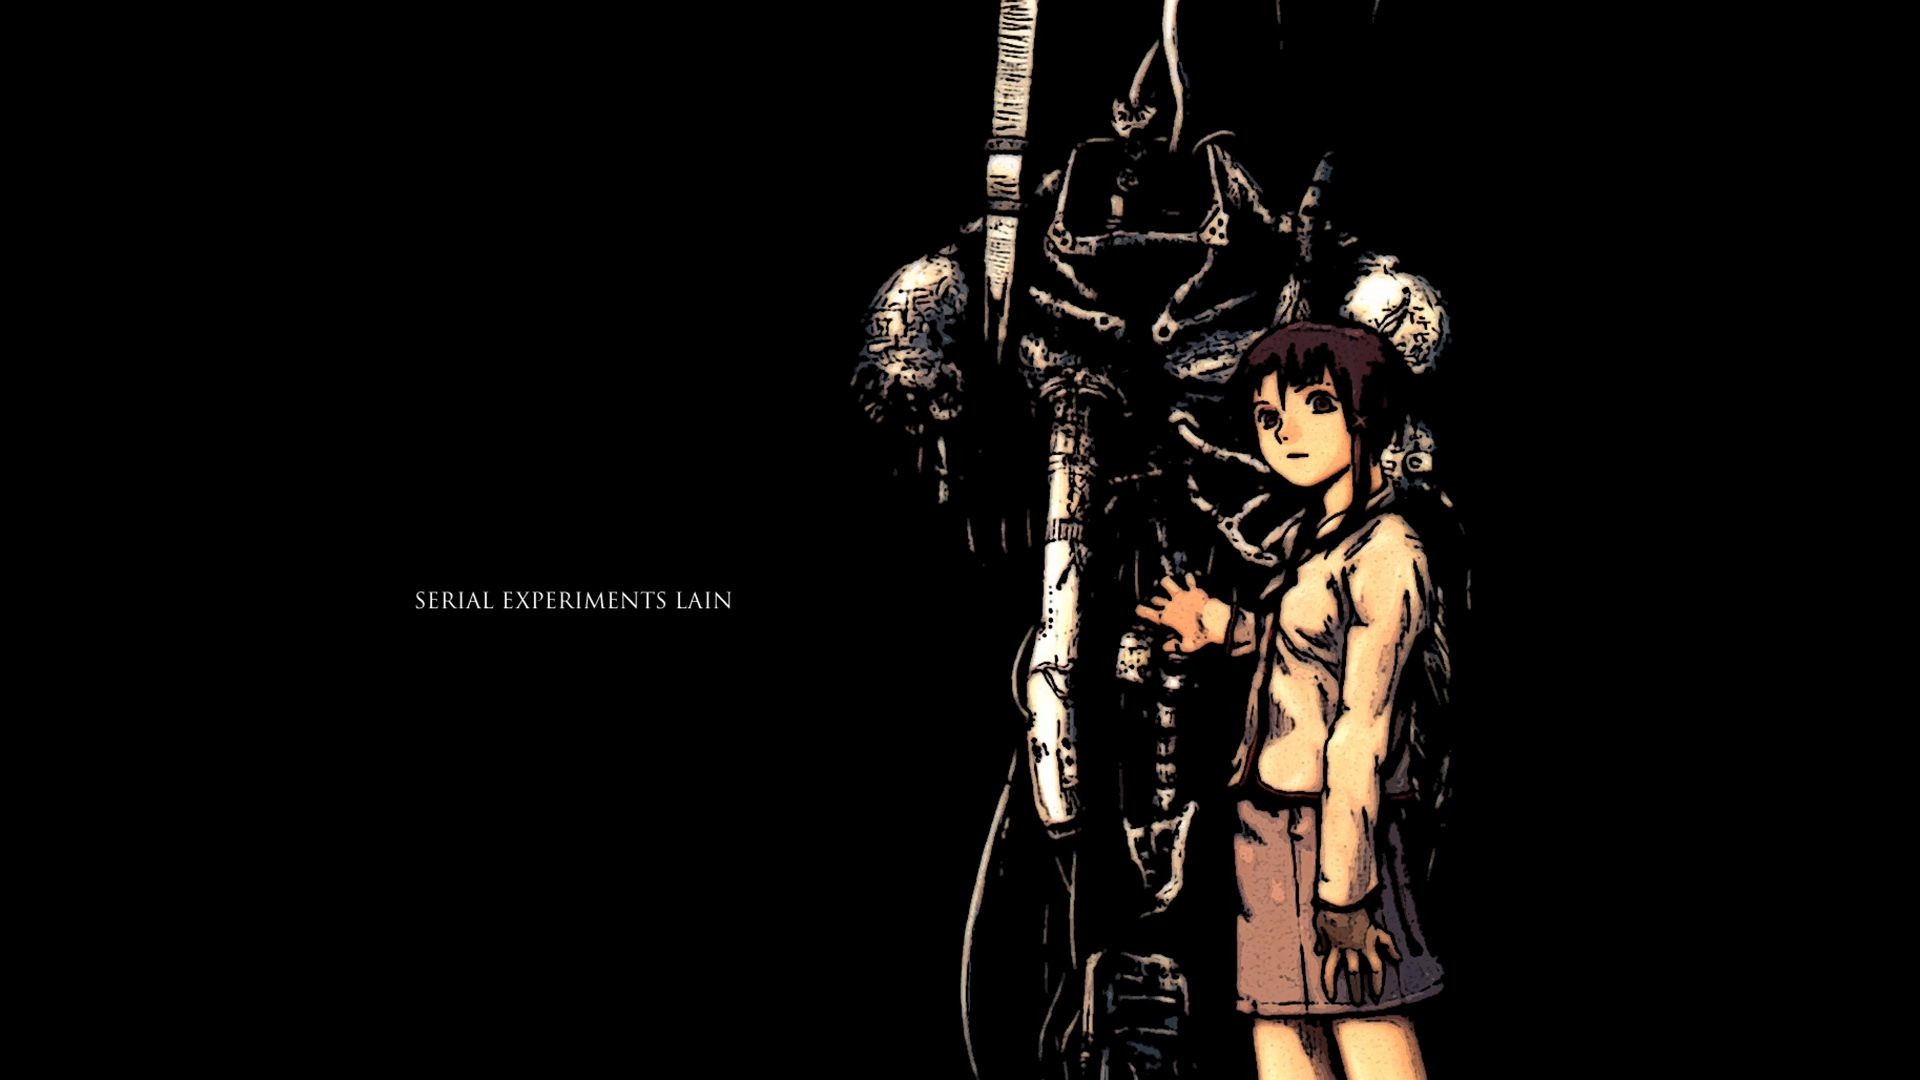 4320x900px  free download  HD wallpaper Anime Serial Experiments Lain   Wallpaper Flare